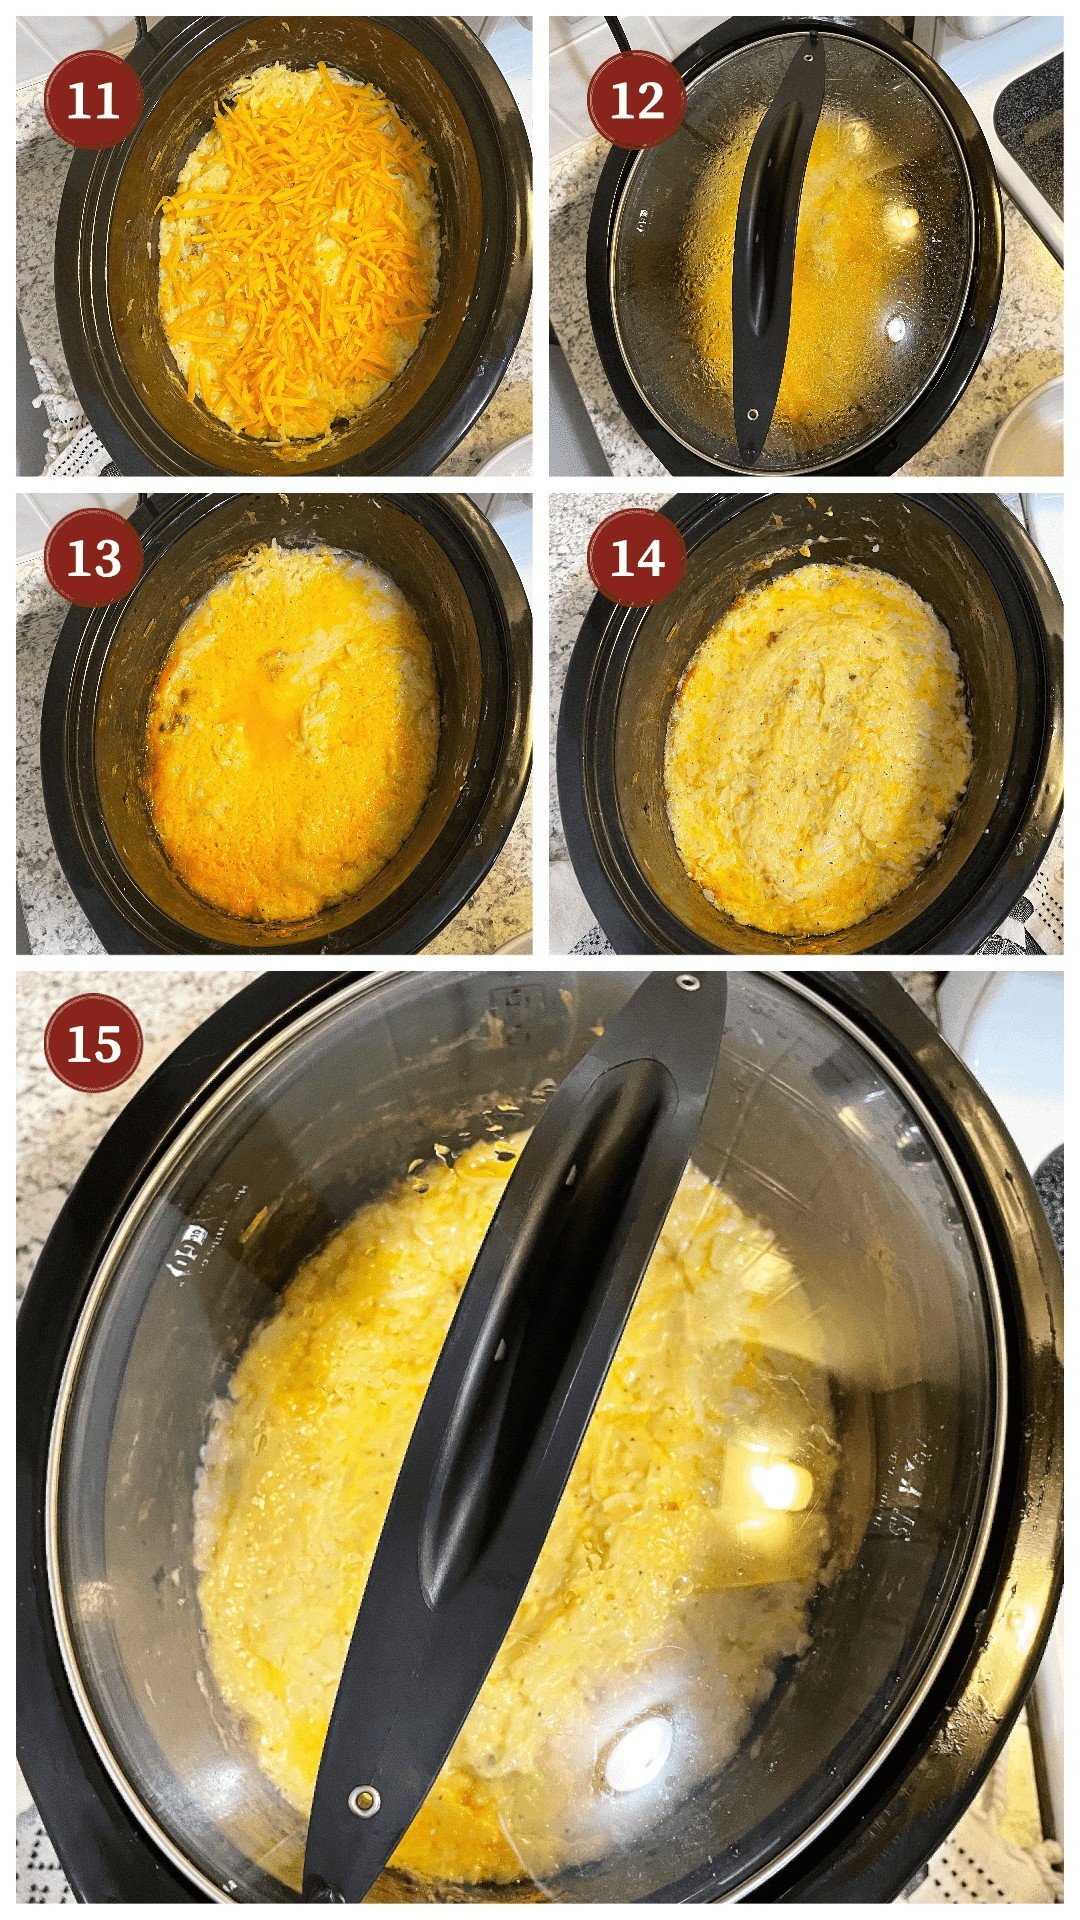 A collage of images showing how to cook cheesy hash brown casserole in a crock pot, step 11 - 15.